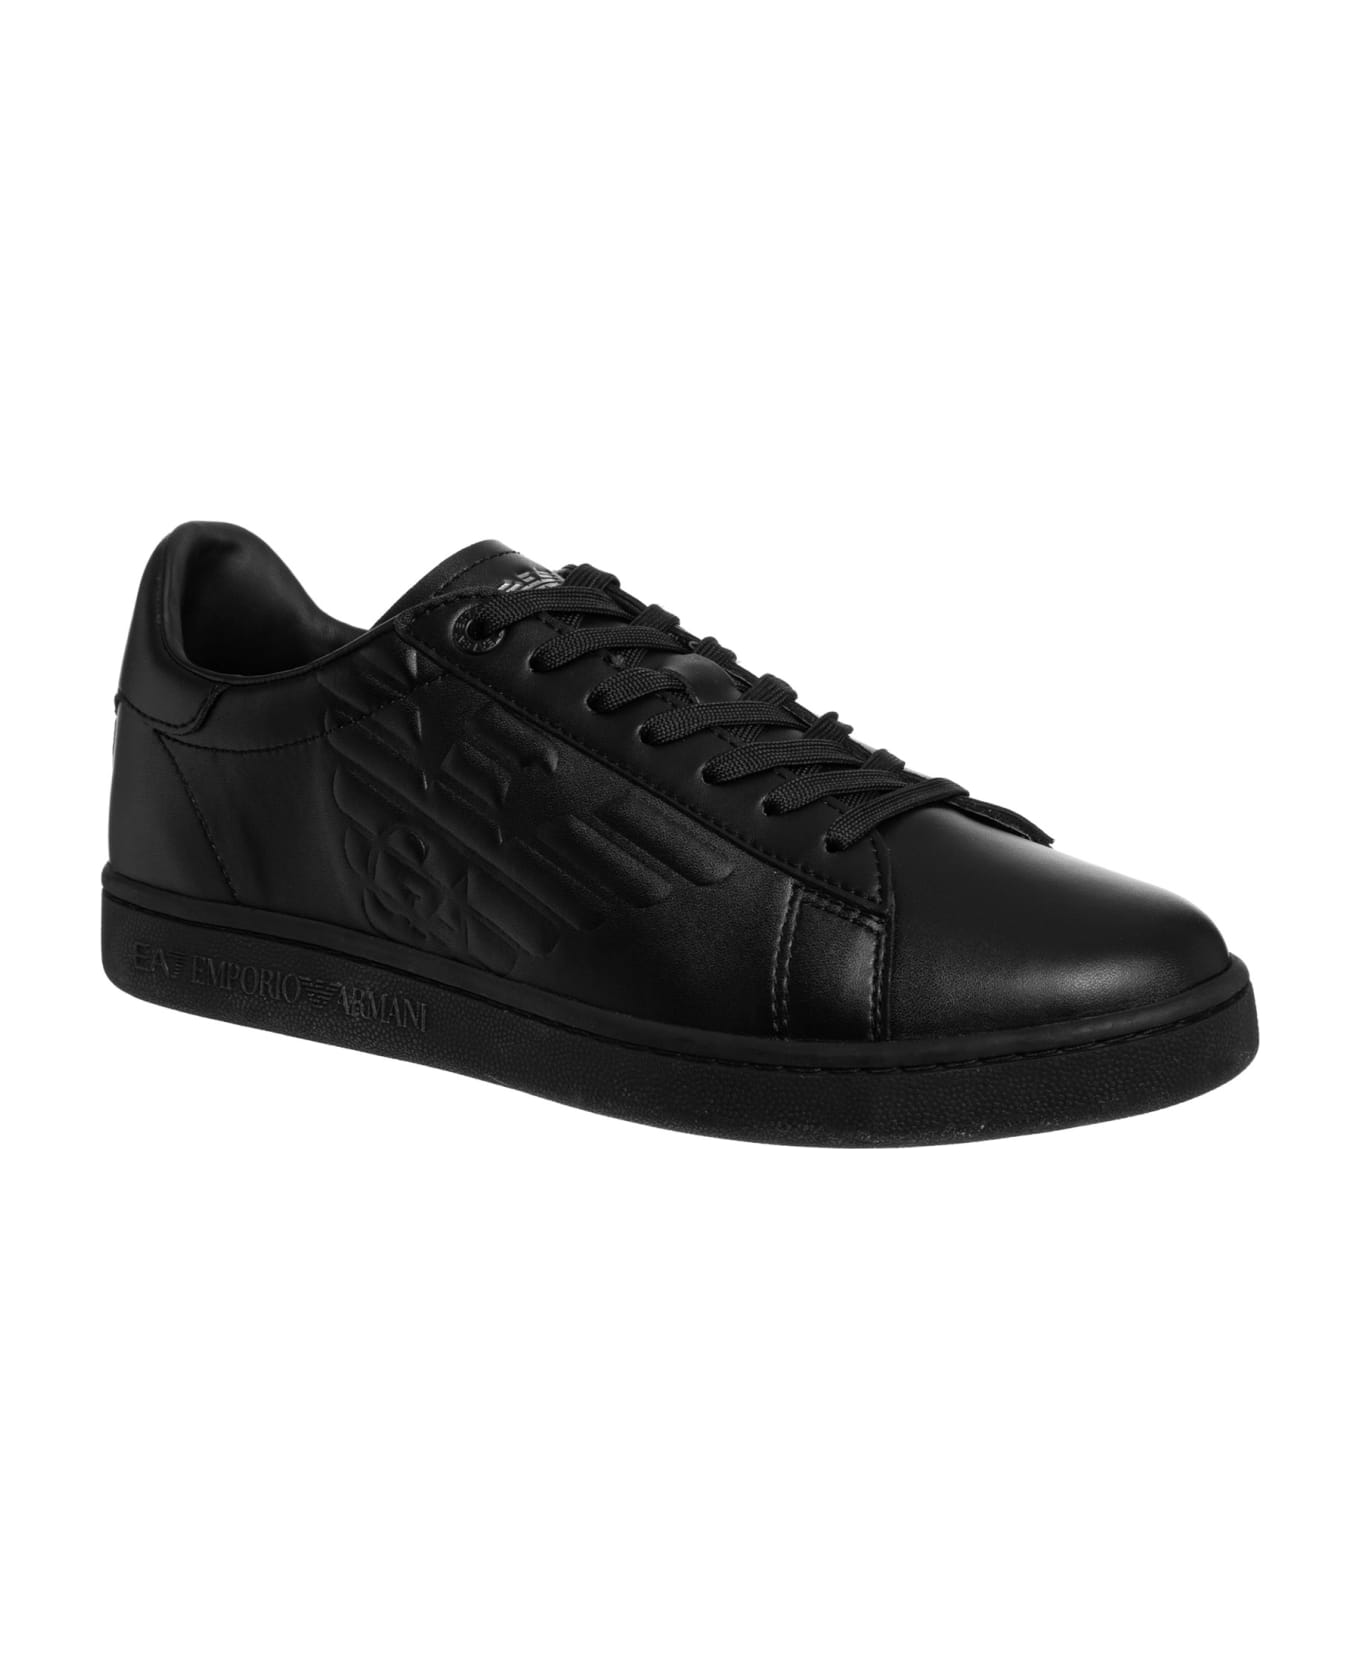 EA7 Classic New Cc Leather Sneakers - Black